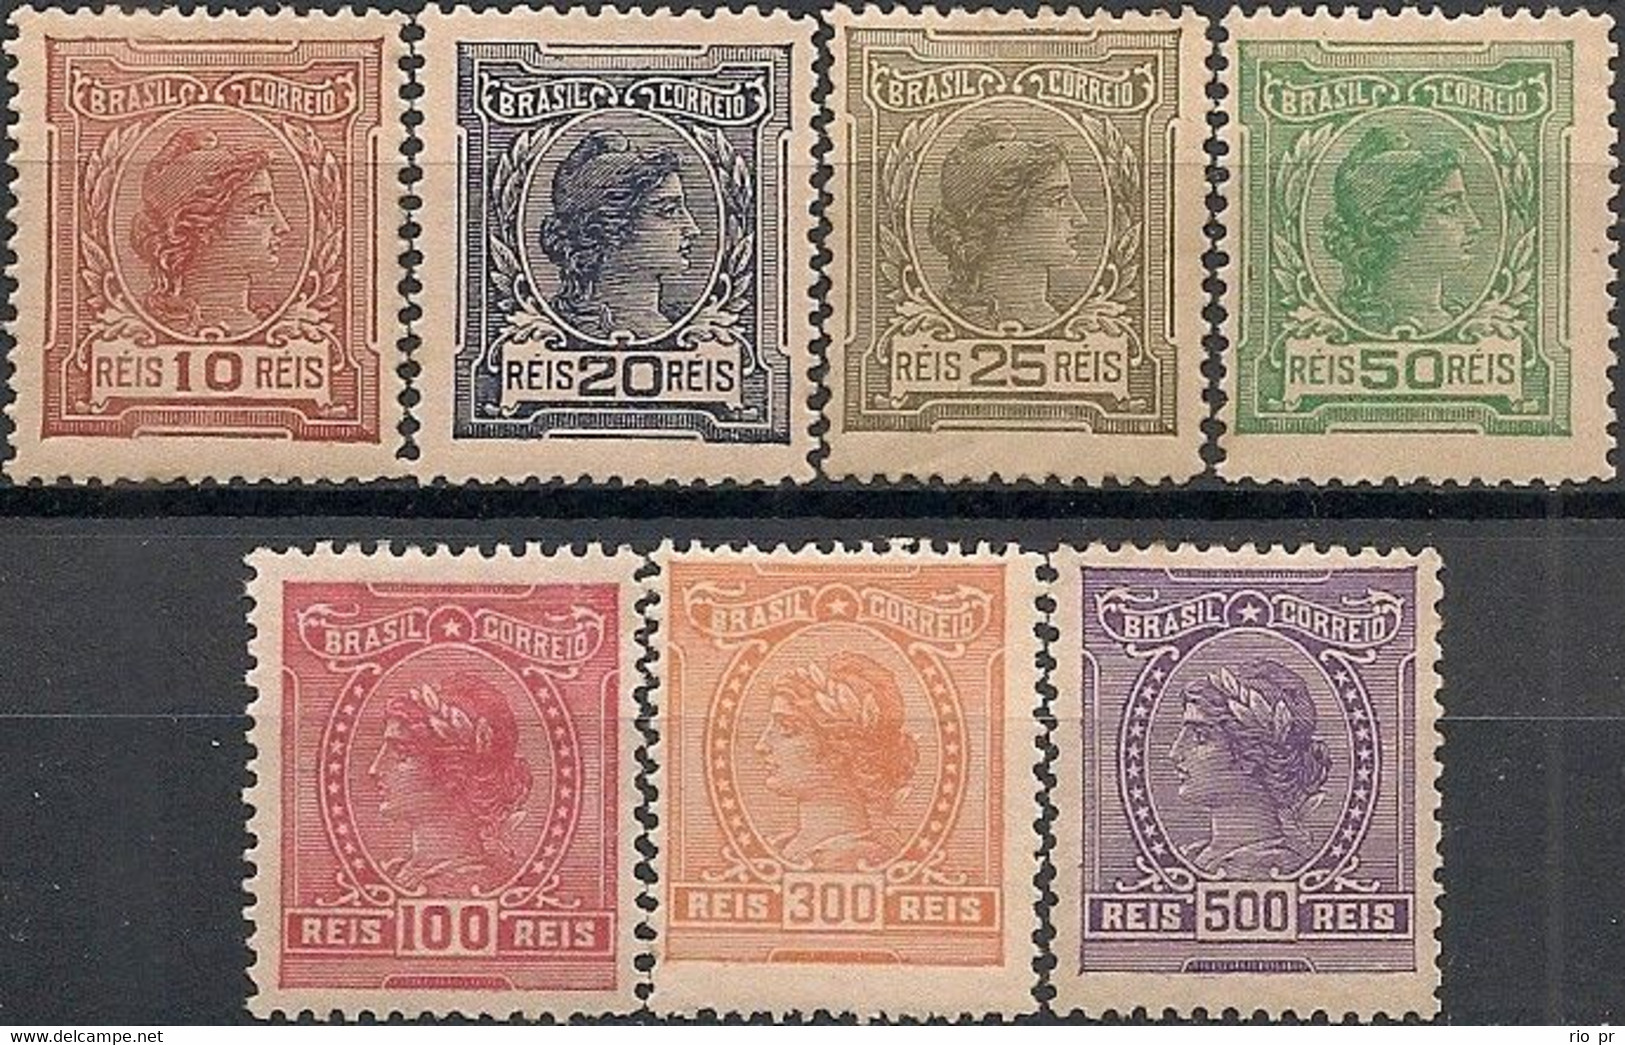 BRAZIL - COMPLETE SET DEFINITIVES: ALLEGORY OF THE REPUBLIC, No Watermark 1918/9 - MNH/MLH/MH - Nuovi